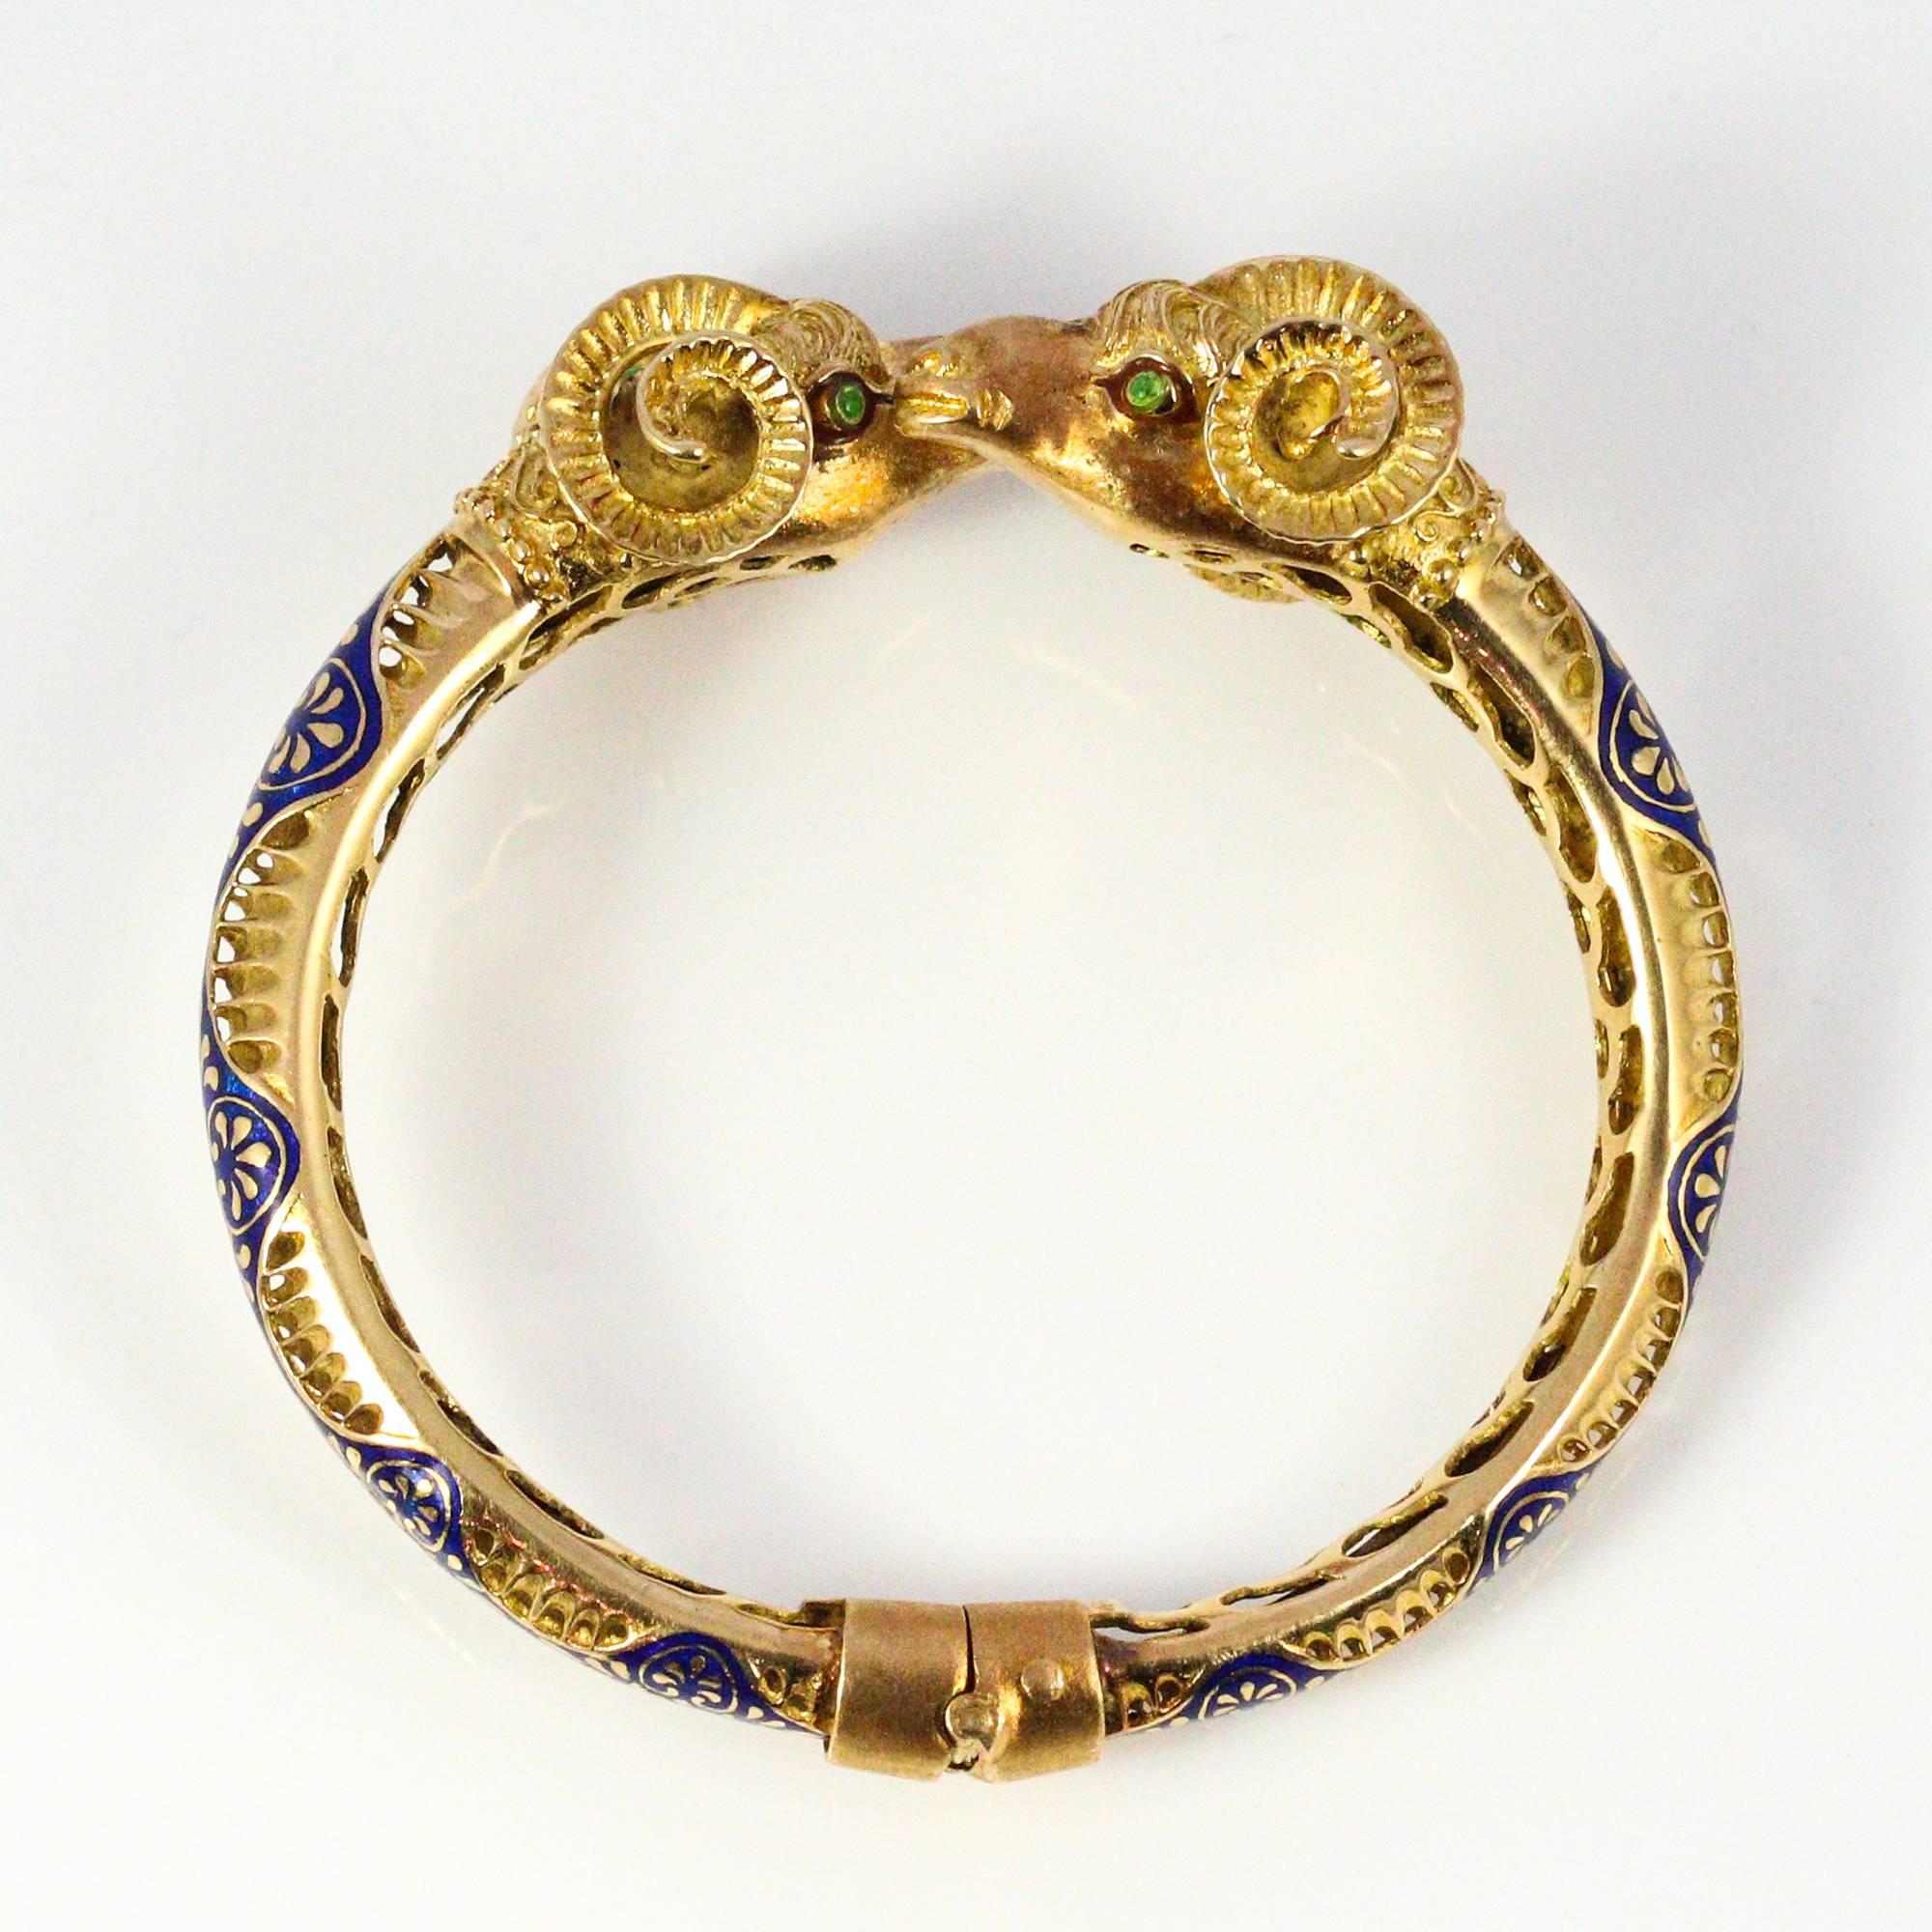 This fabulous, Modernist bracelet is made in 18k yellow gold with the focus being on two ram's heads that join in the center. The ram's heads are detailed with engraving and each accented with 3 cabochon emeralds at the top of their heads and 2